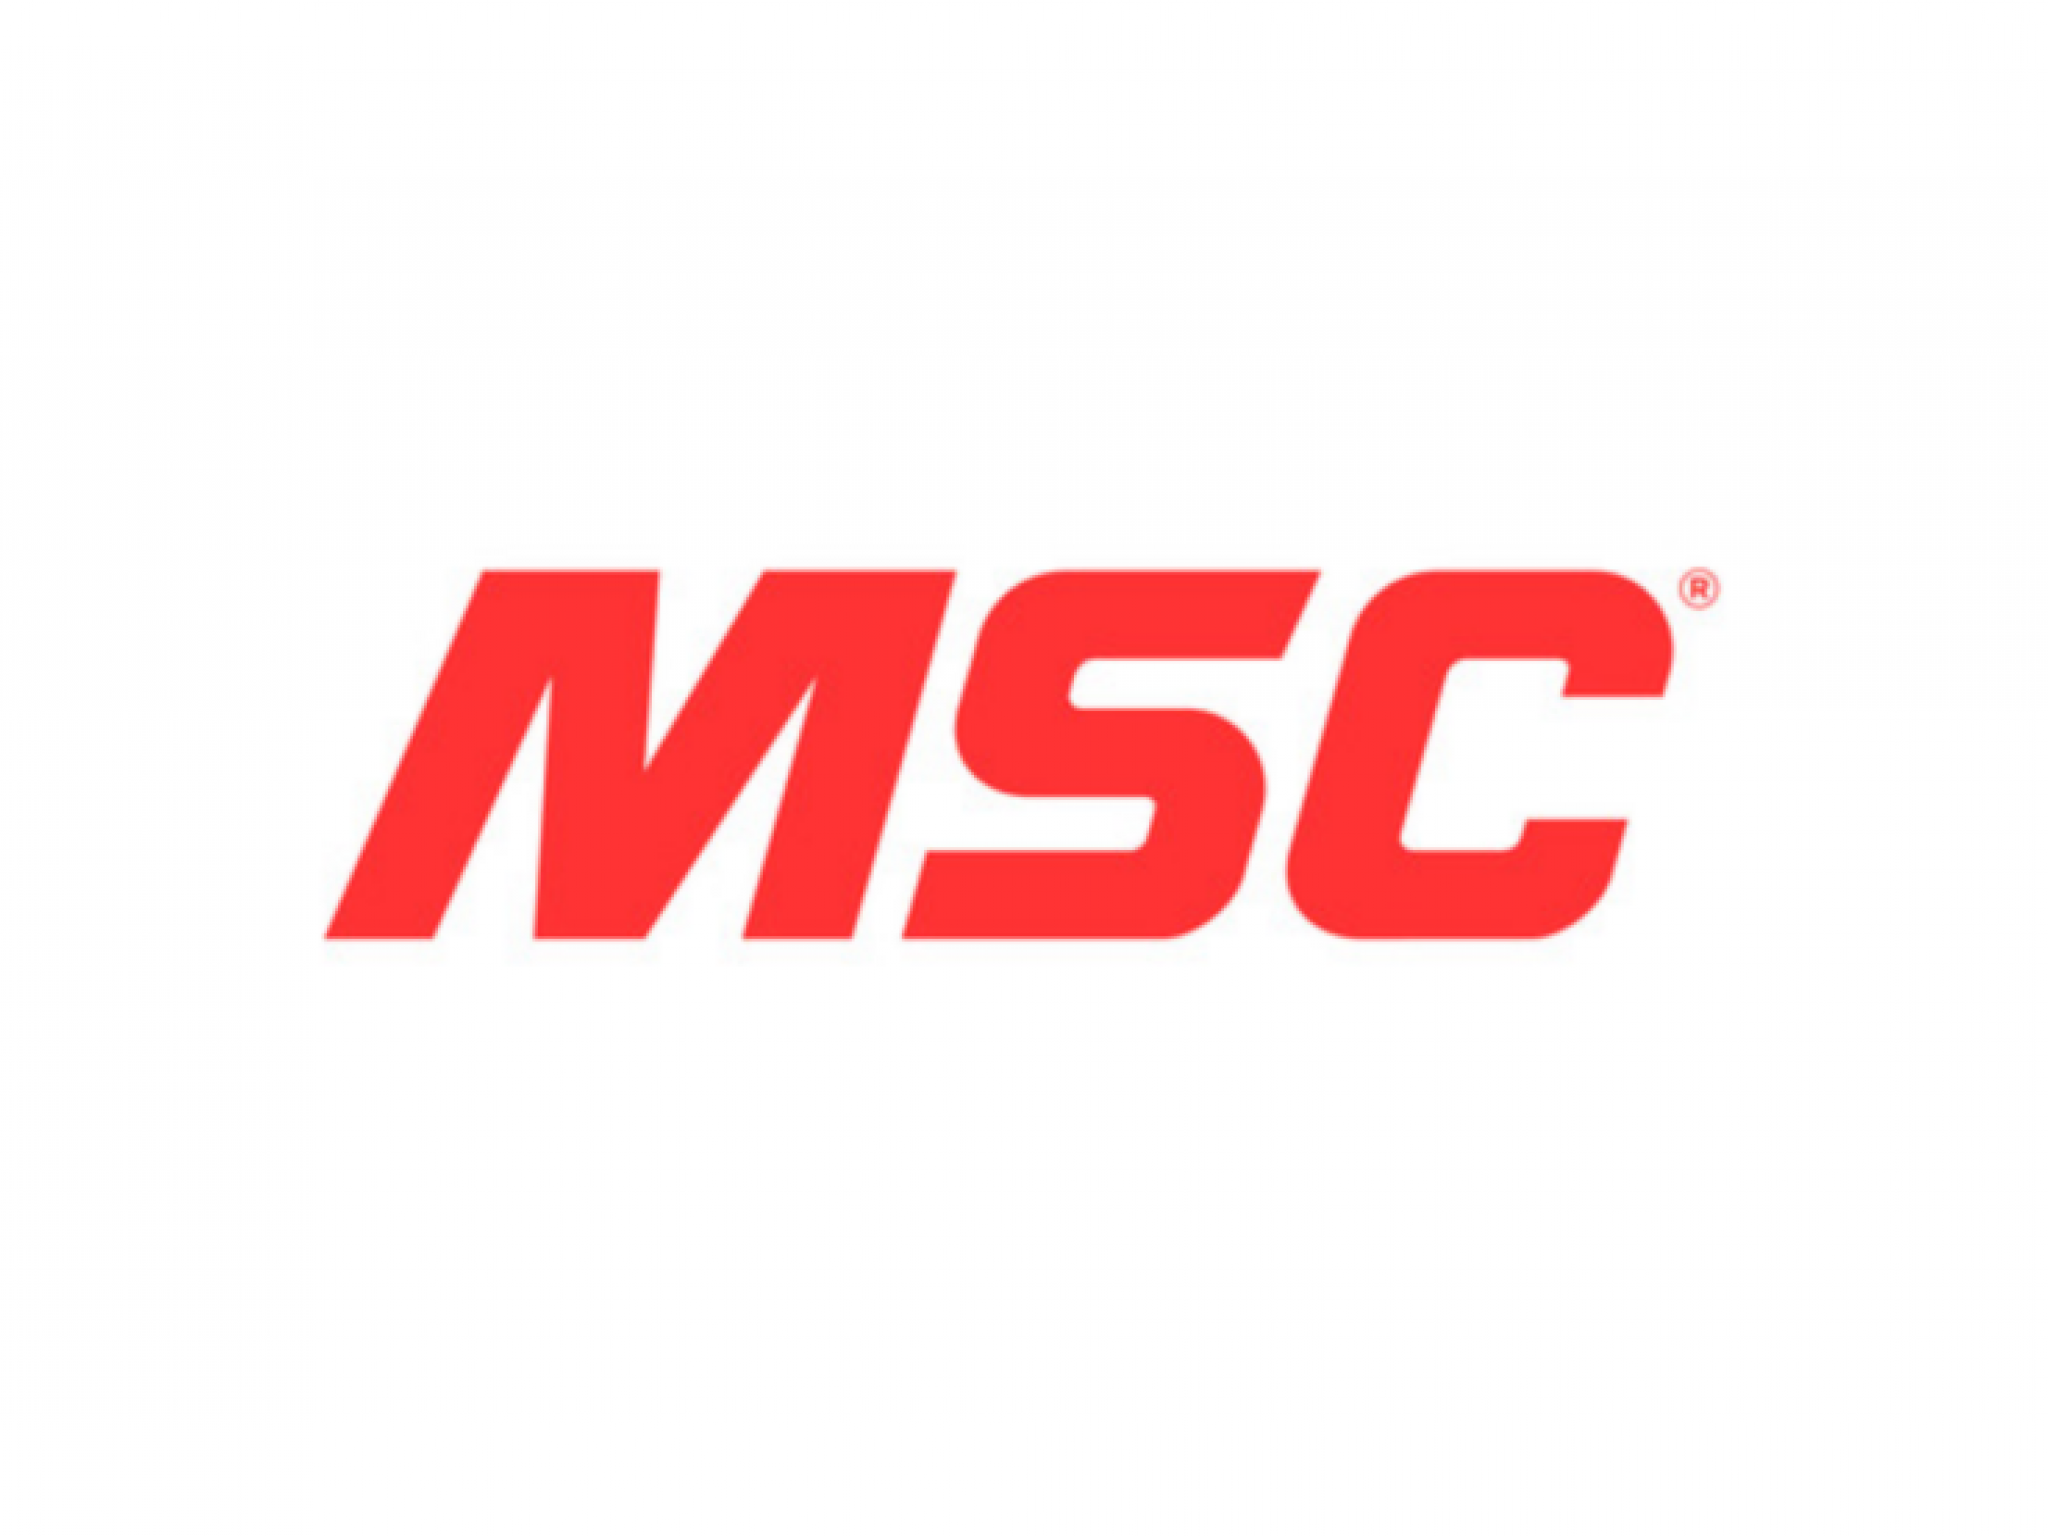  msc-industrial-direct-expands-in-canada-acquires-metalworking-distributor-kar-industrial 